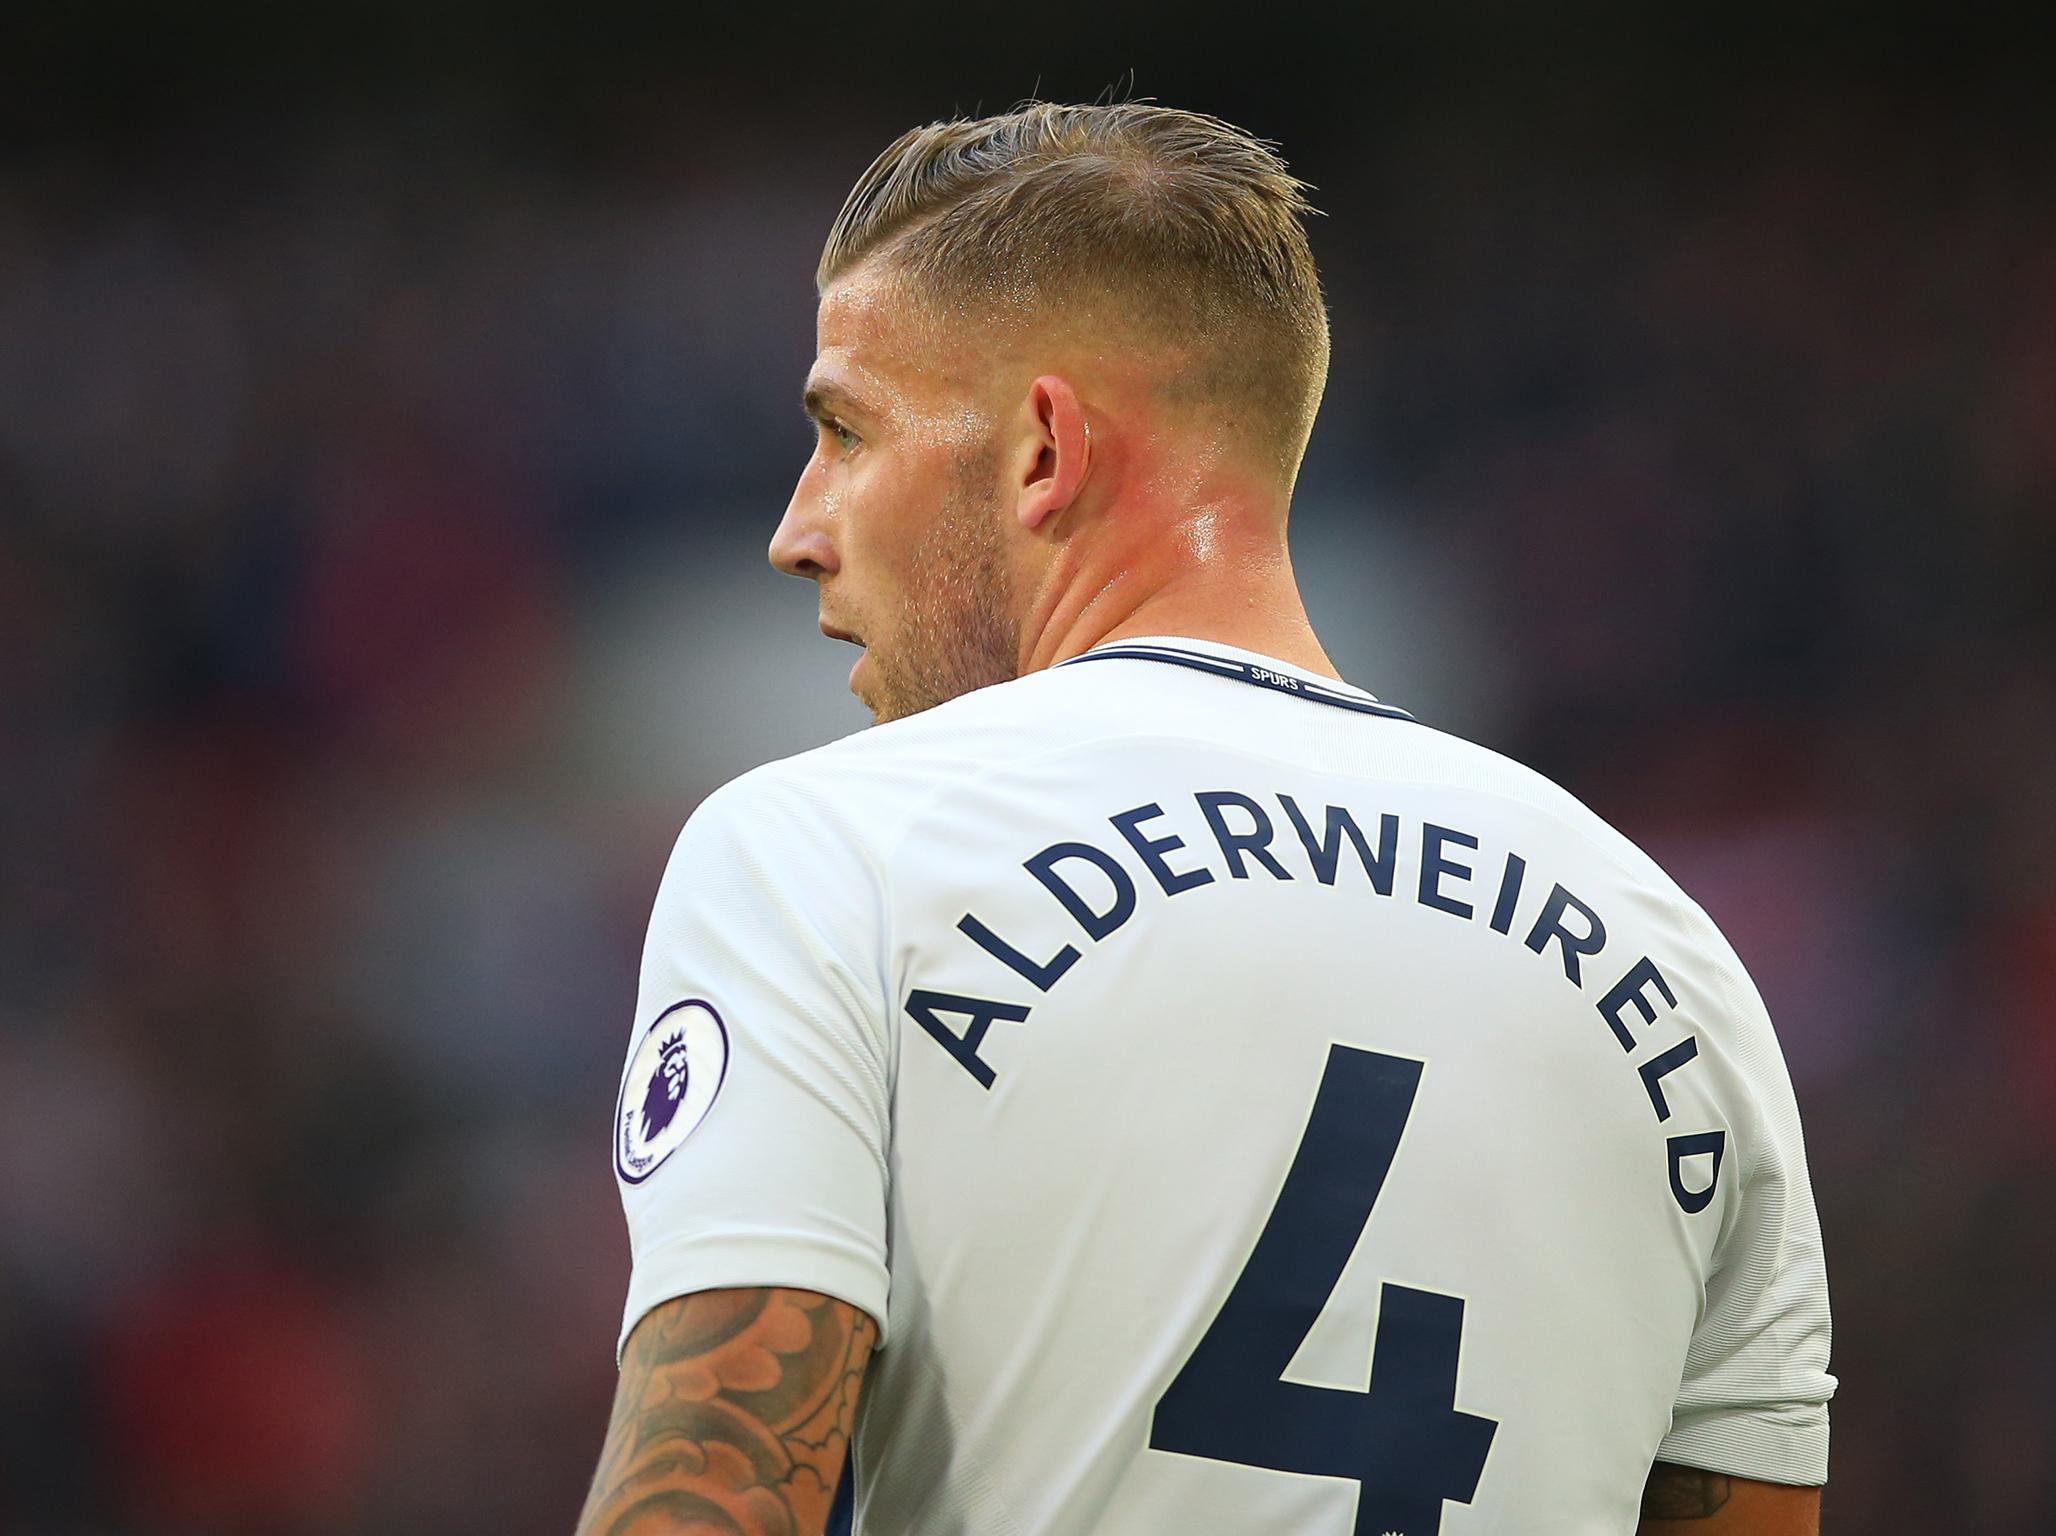 Mourinho wanted to sign Toby Alderweireld